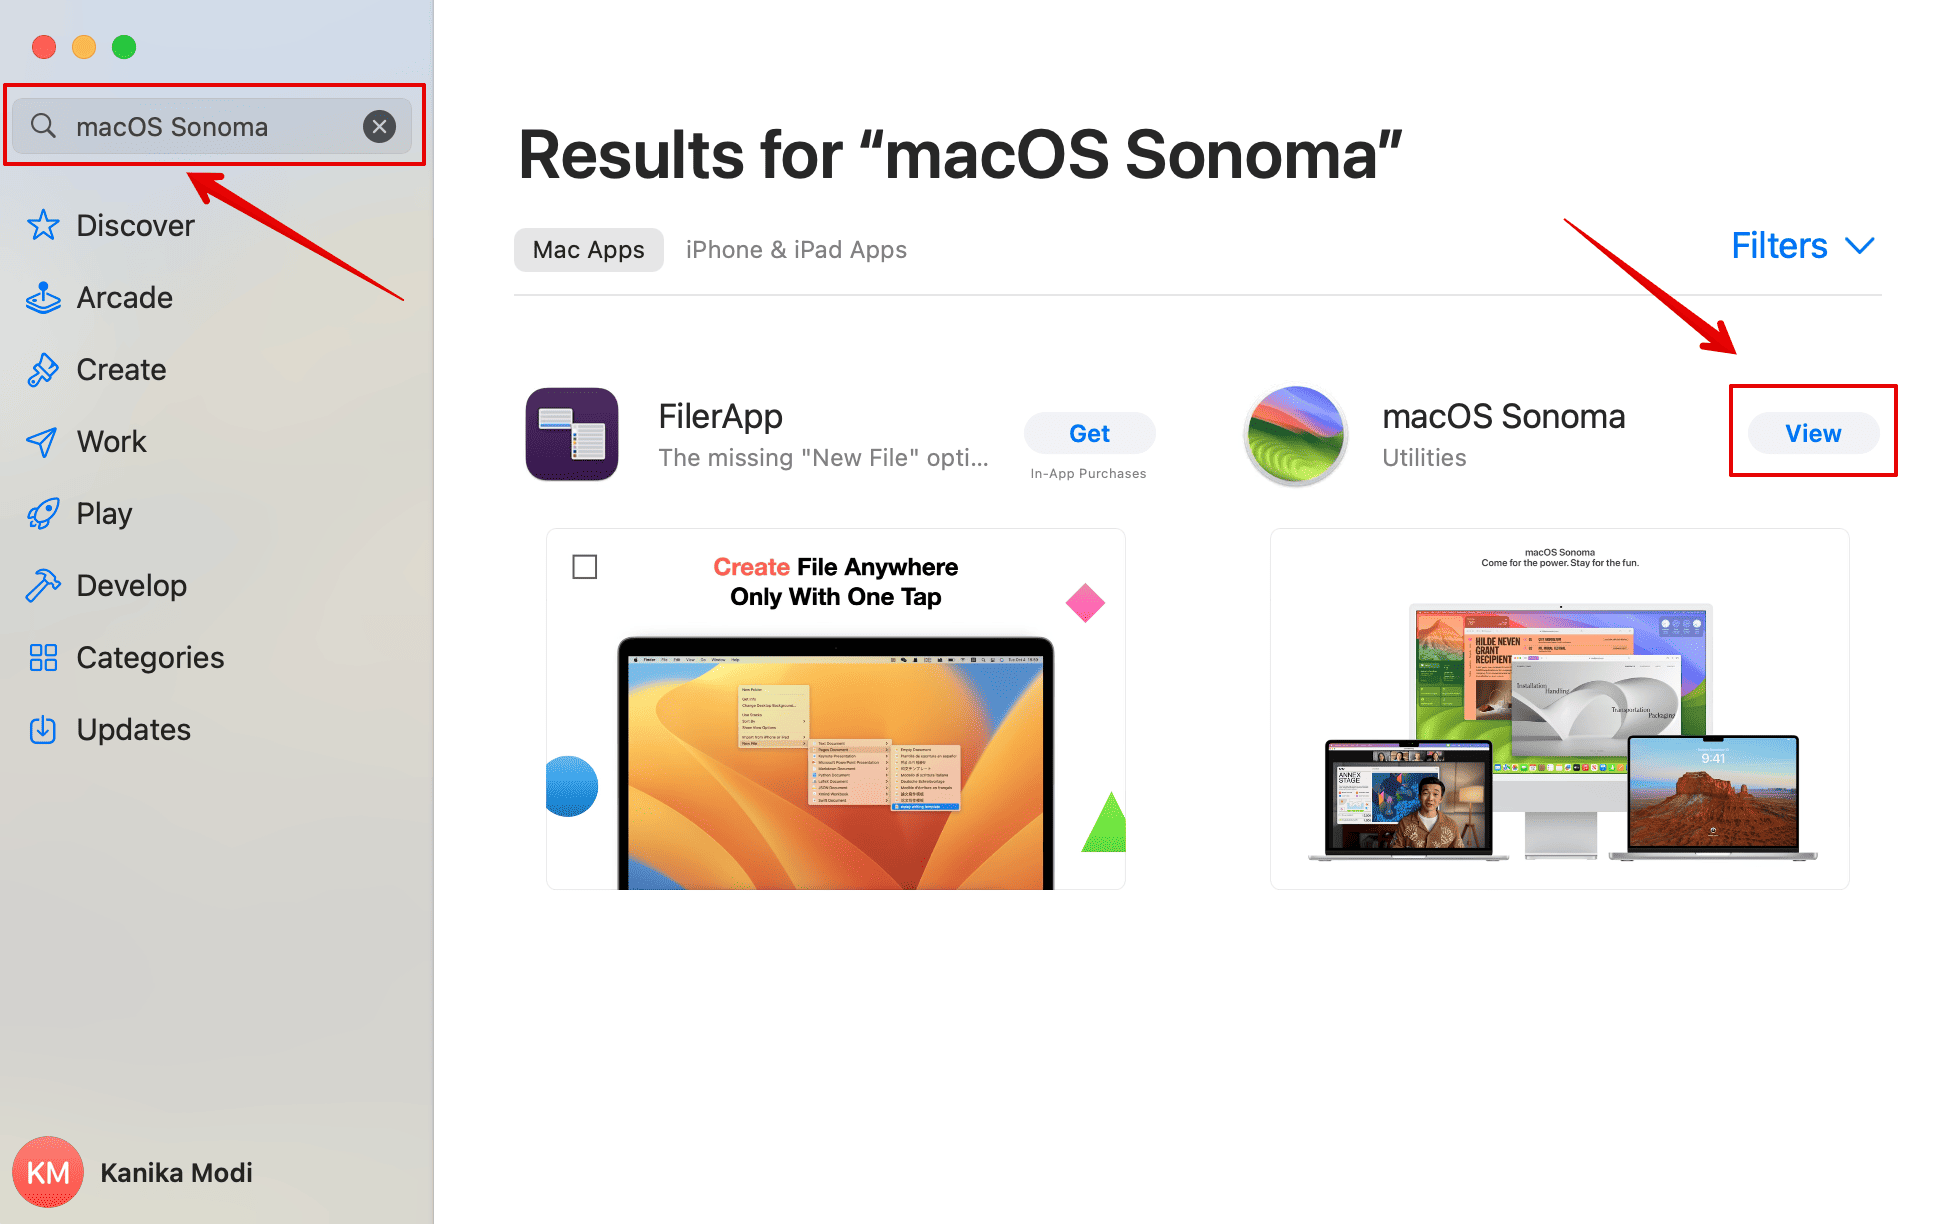 Click on View to open macOS Sonoma